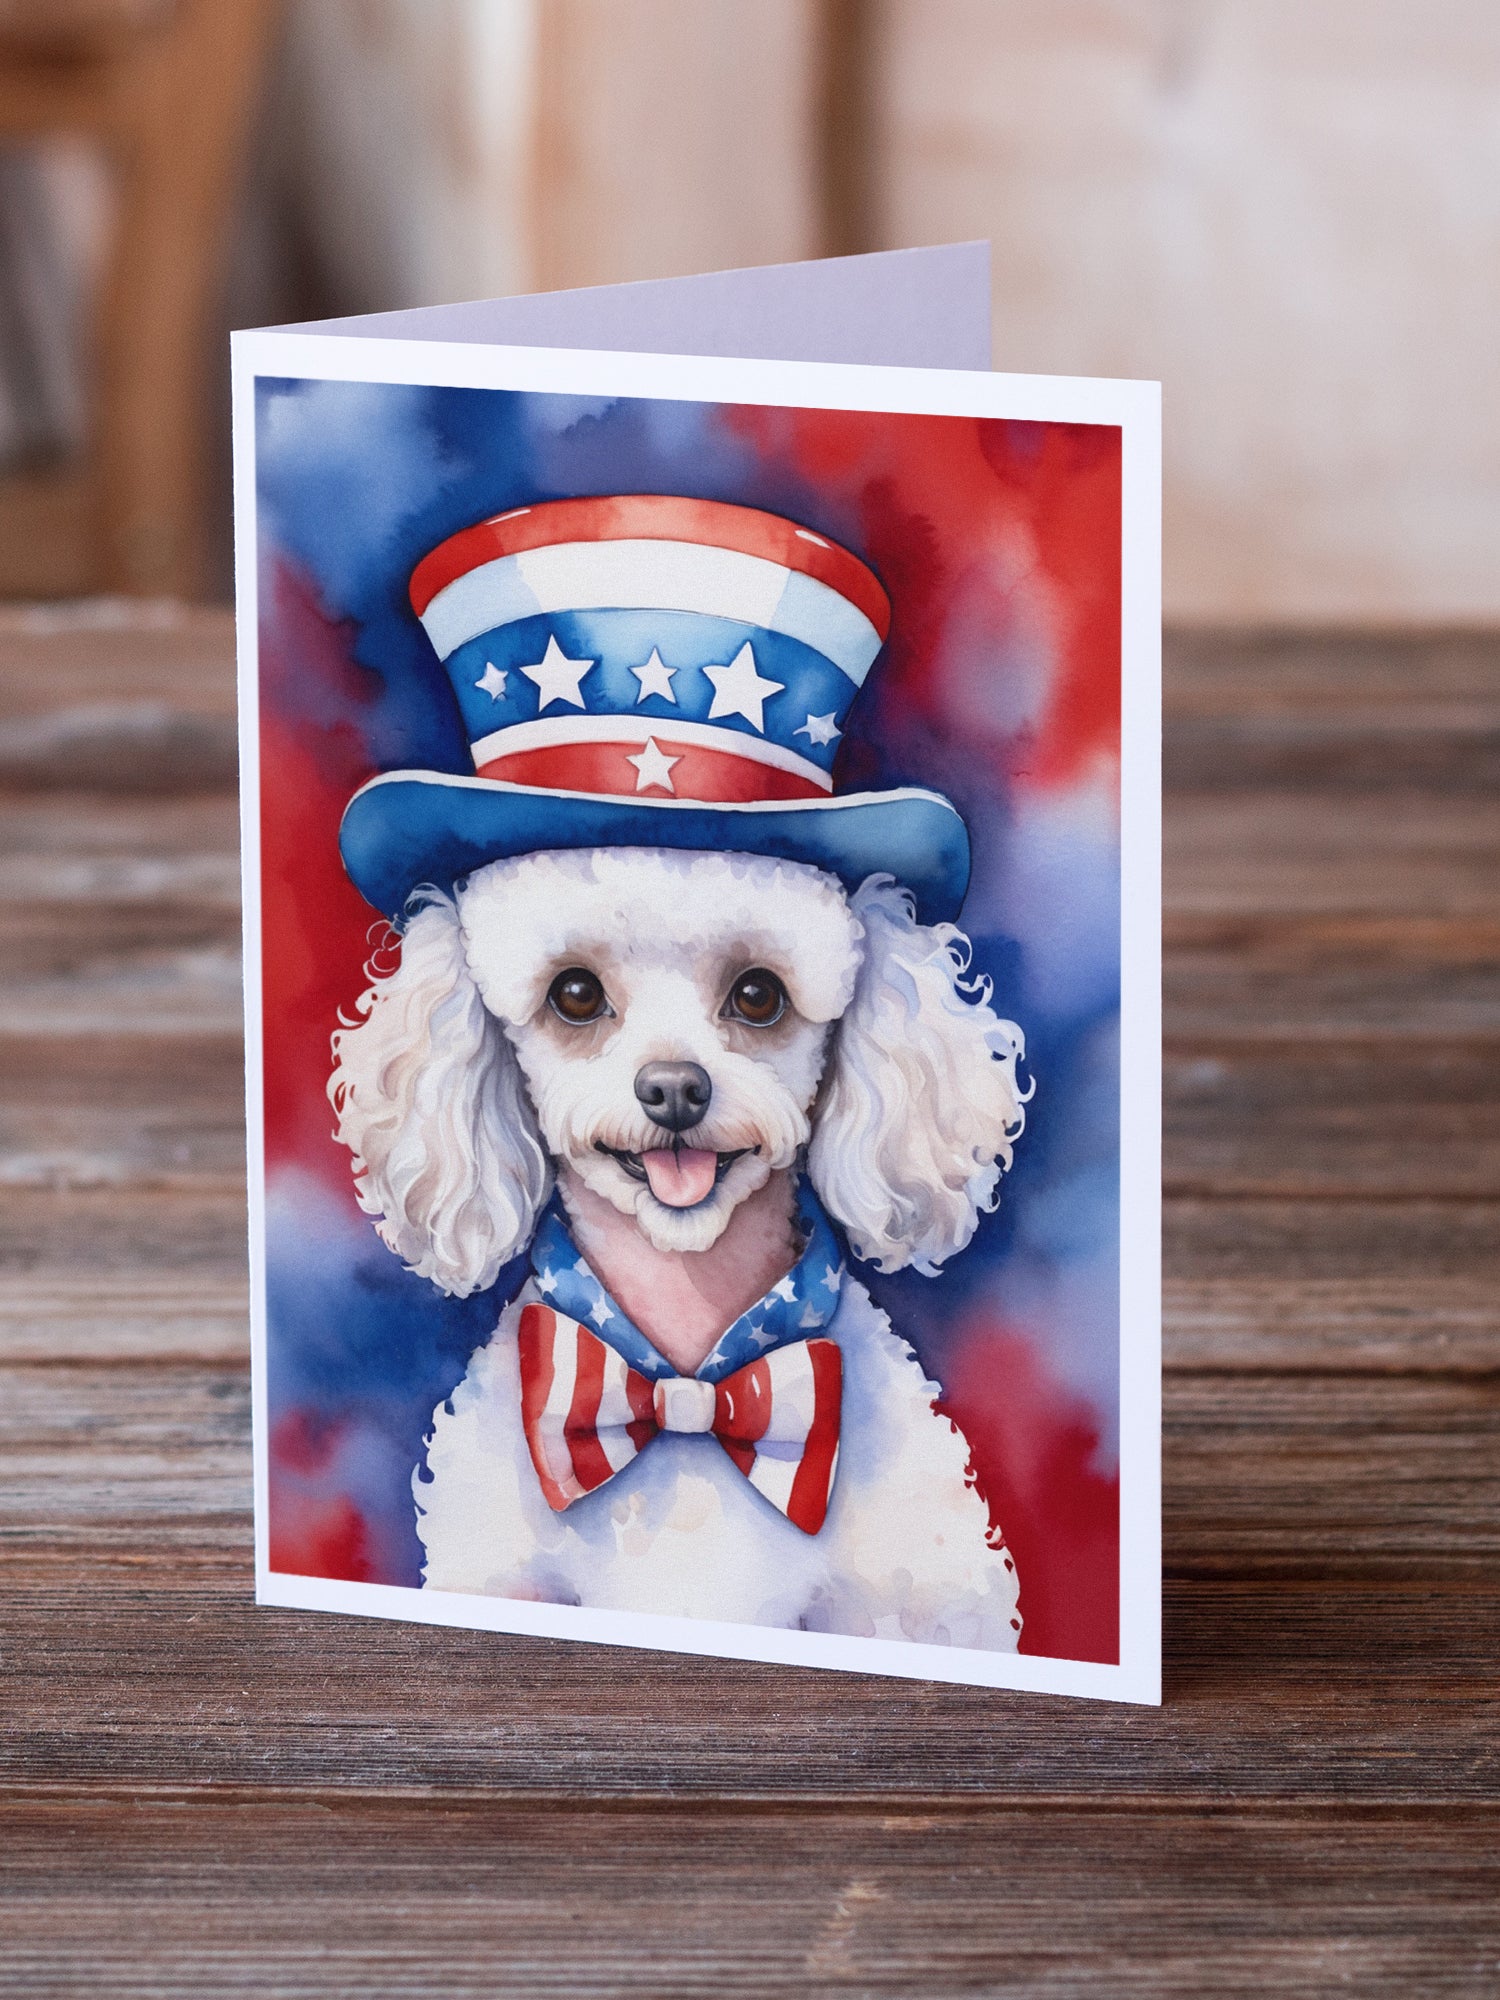 Buy this White Poodle Patriotic American Greeting Cards Pack of 8